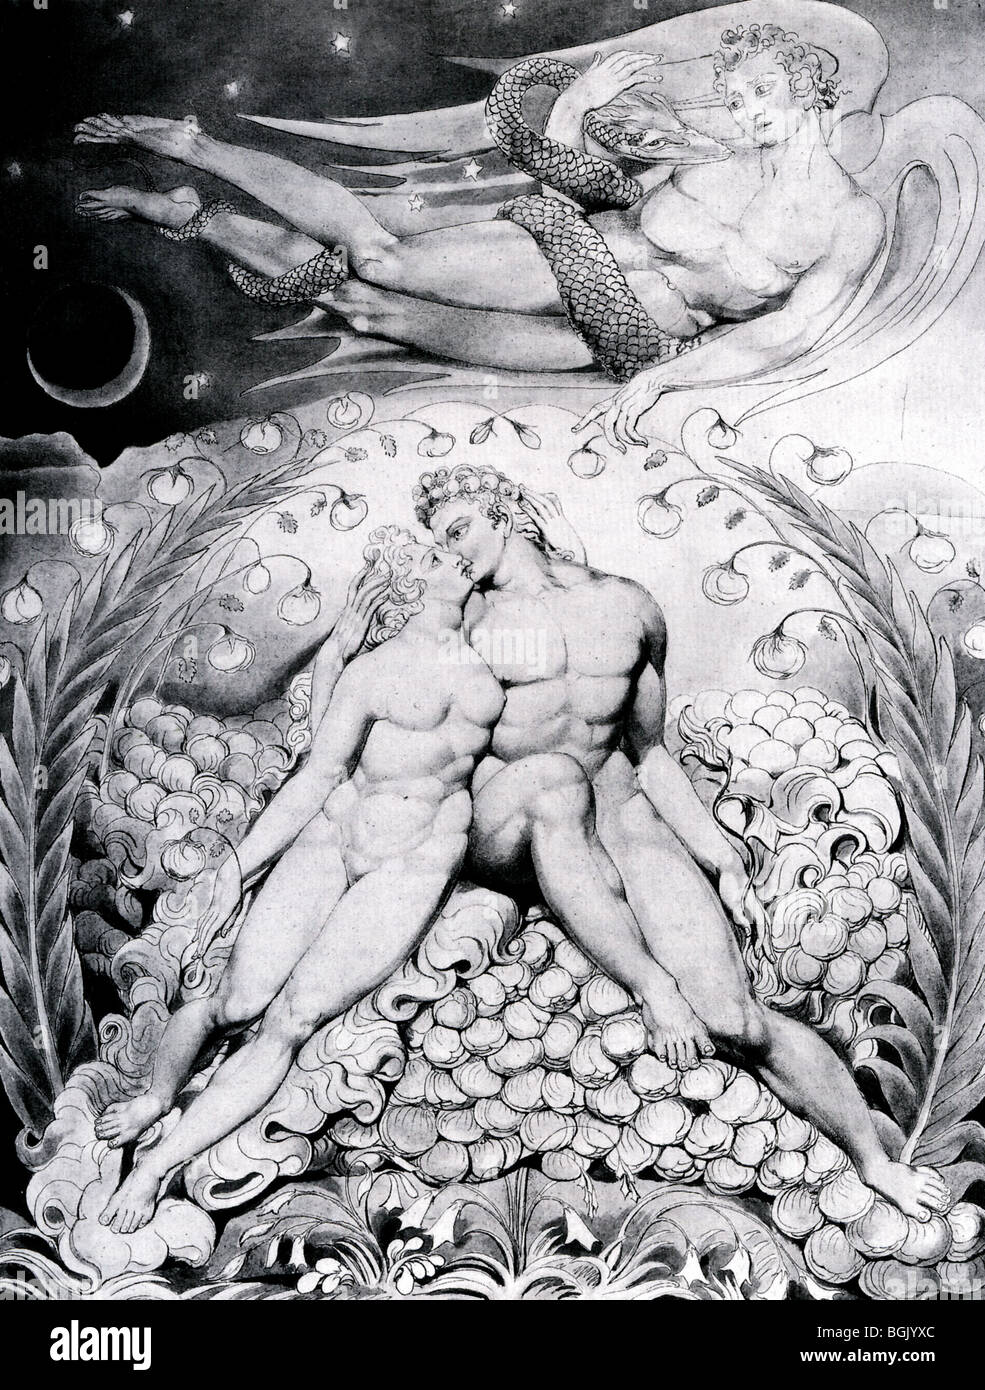 PARADISE LOST illustration by William Blake in 1807 shows Adam and Eve watched by Satan as he holds a serpent Stock Photo